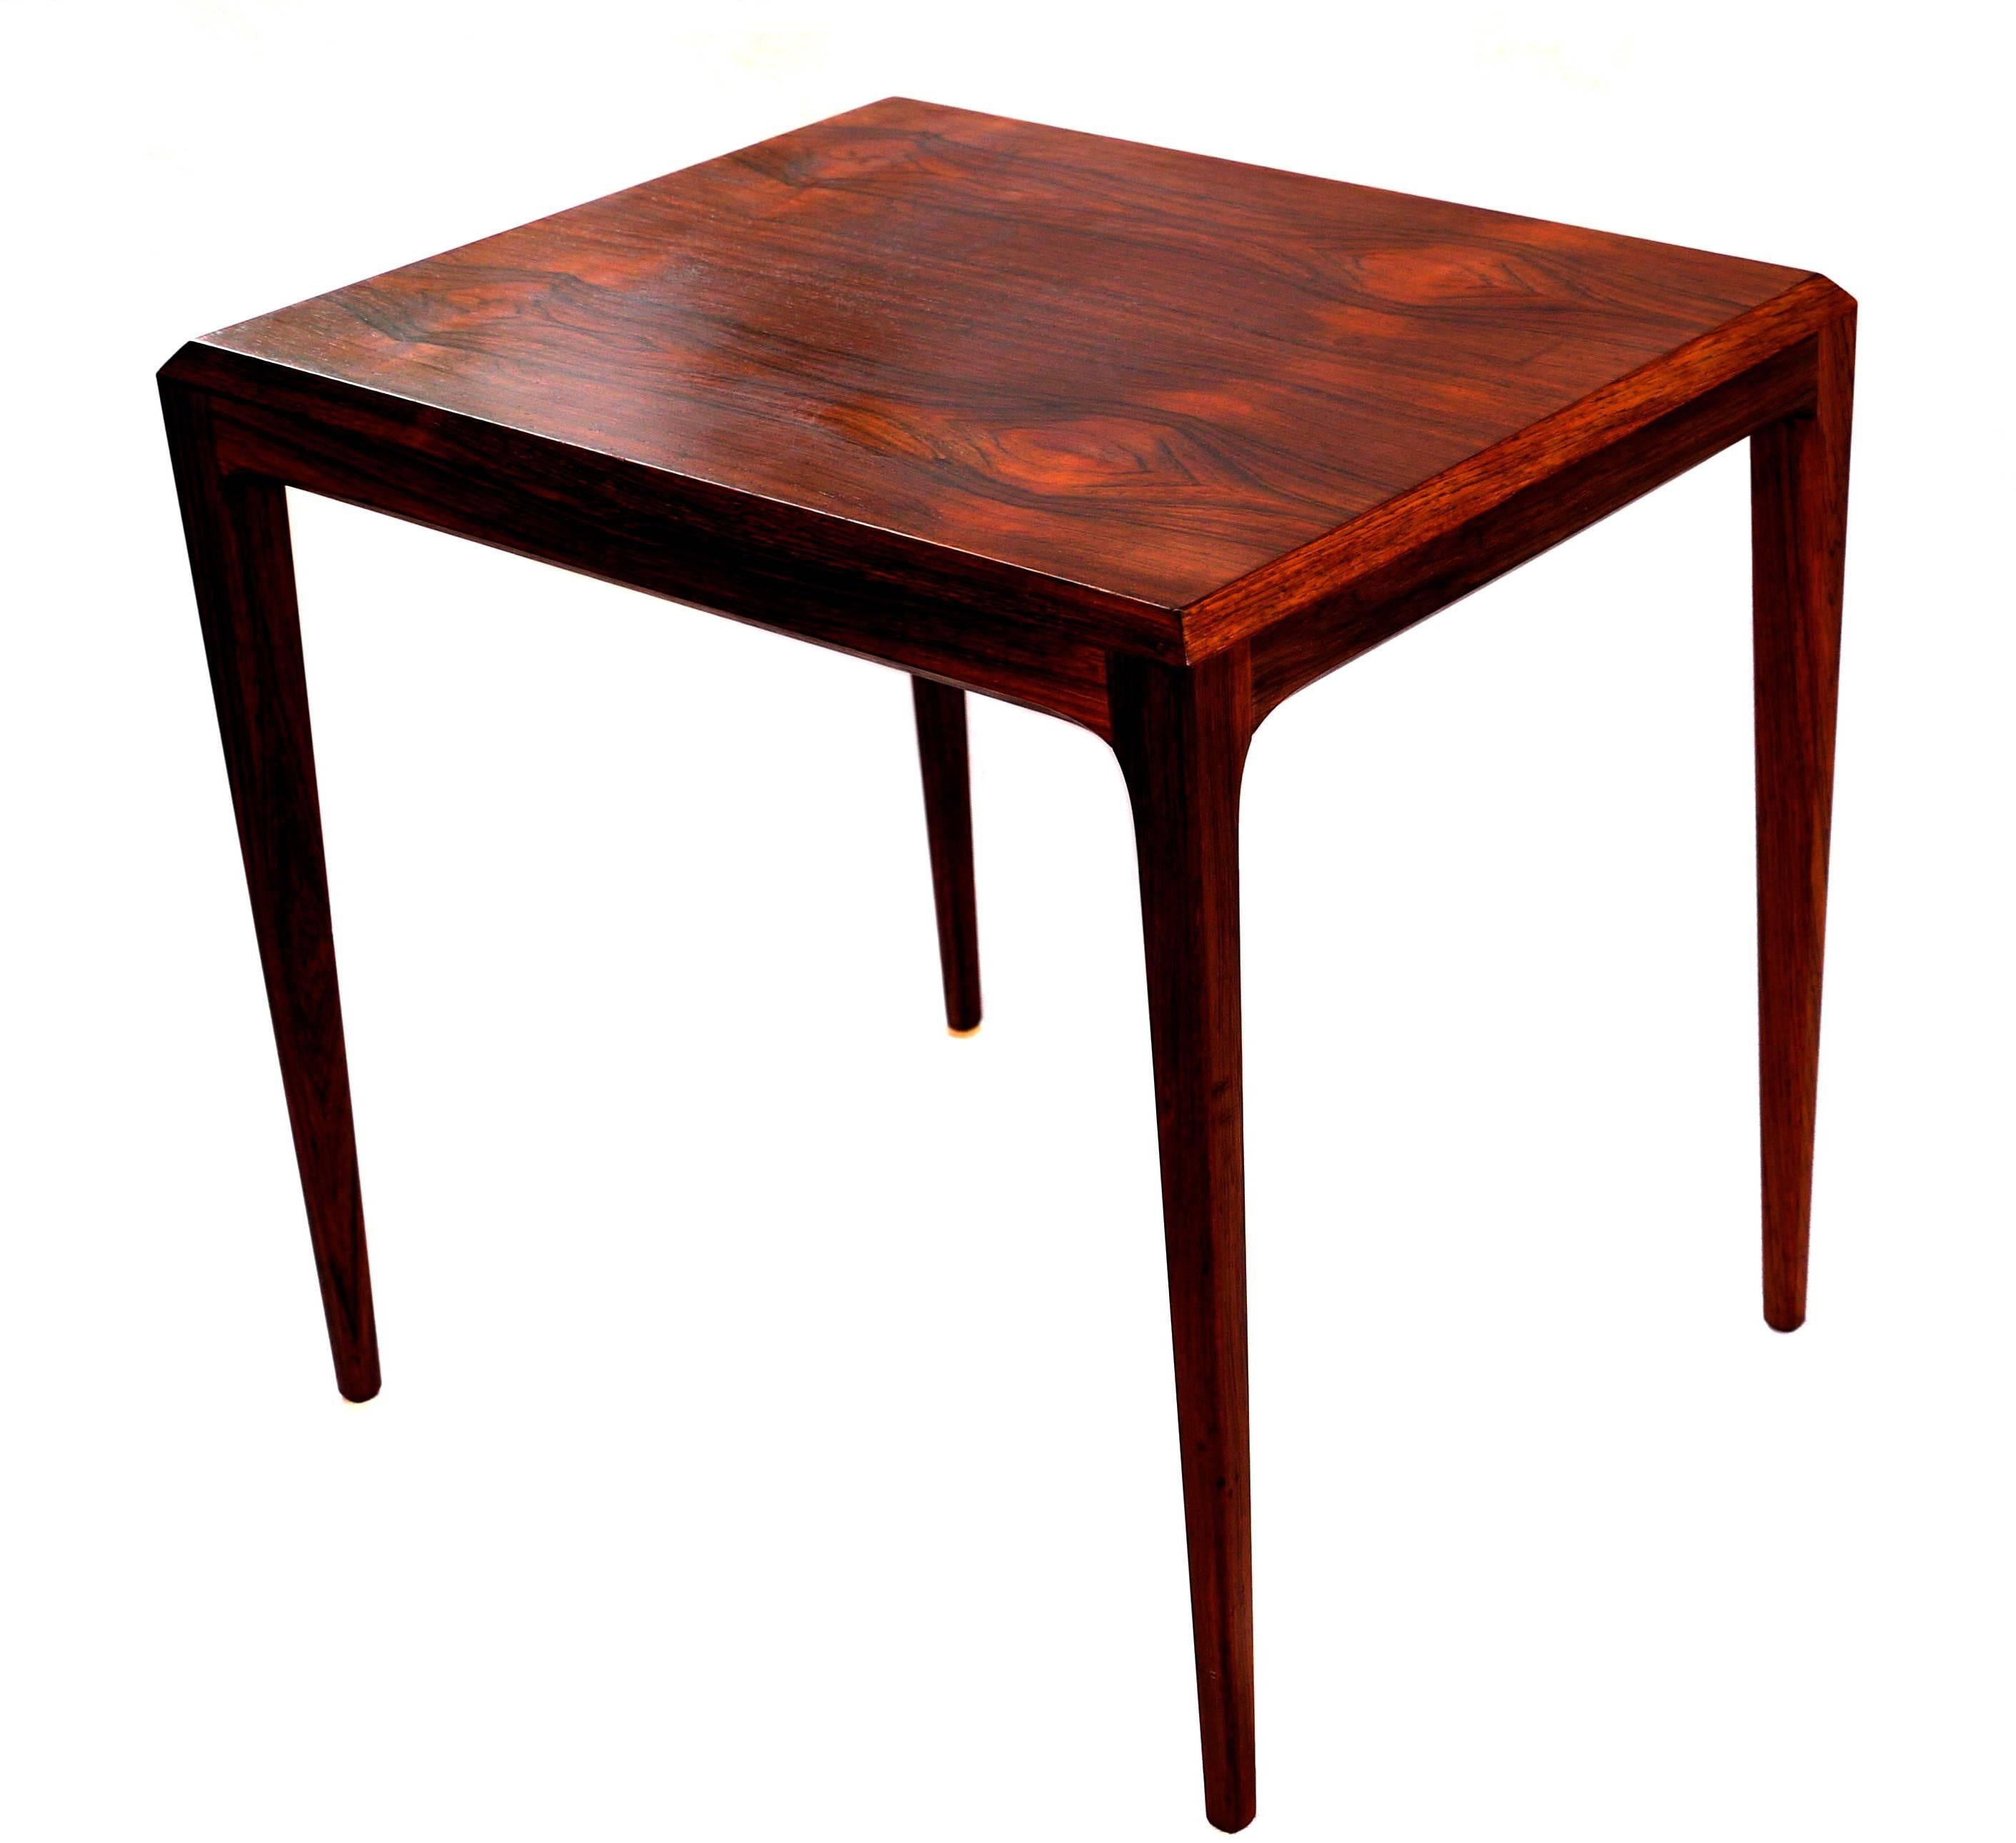 This side table was created by the Danish designer Johannes Andersen for CFC Silkeborg in Denmark. It consists of a rosewood veneered top and a solid rosewood frame. The design features slanted edges and cylindrical legs. Very good original vintage